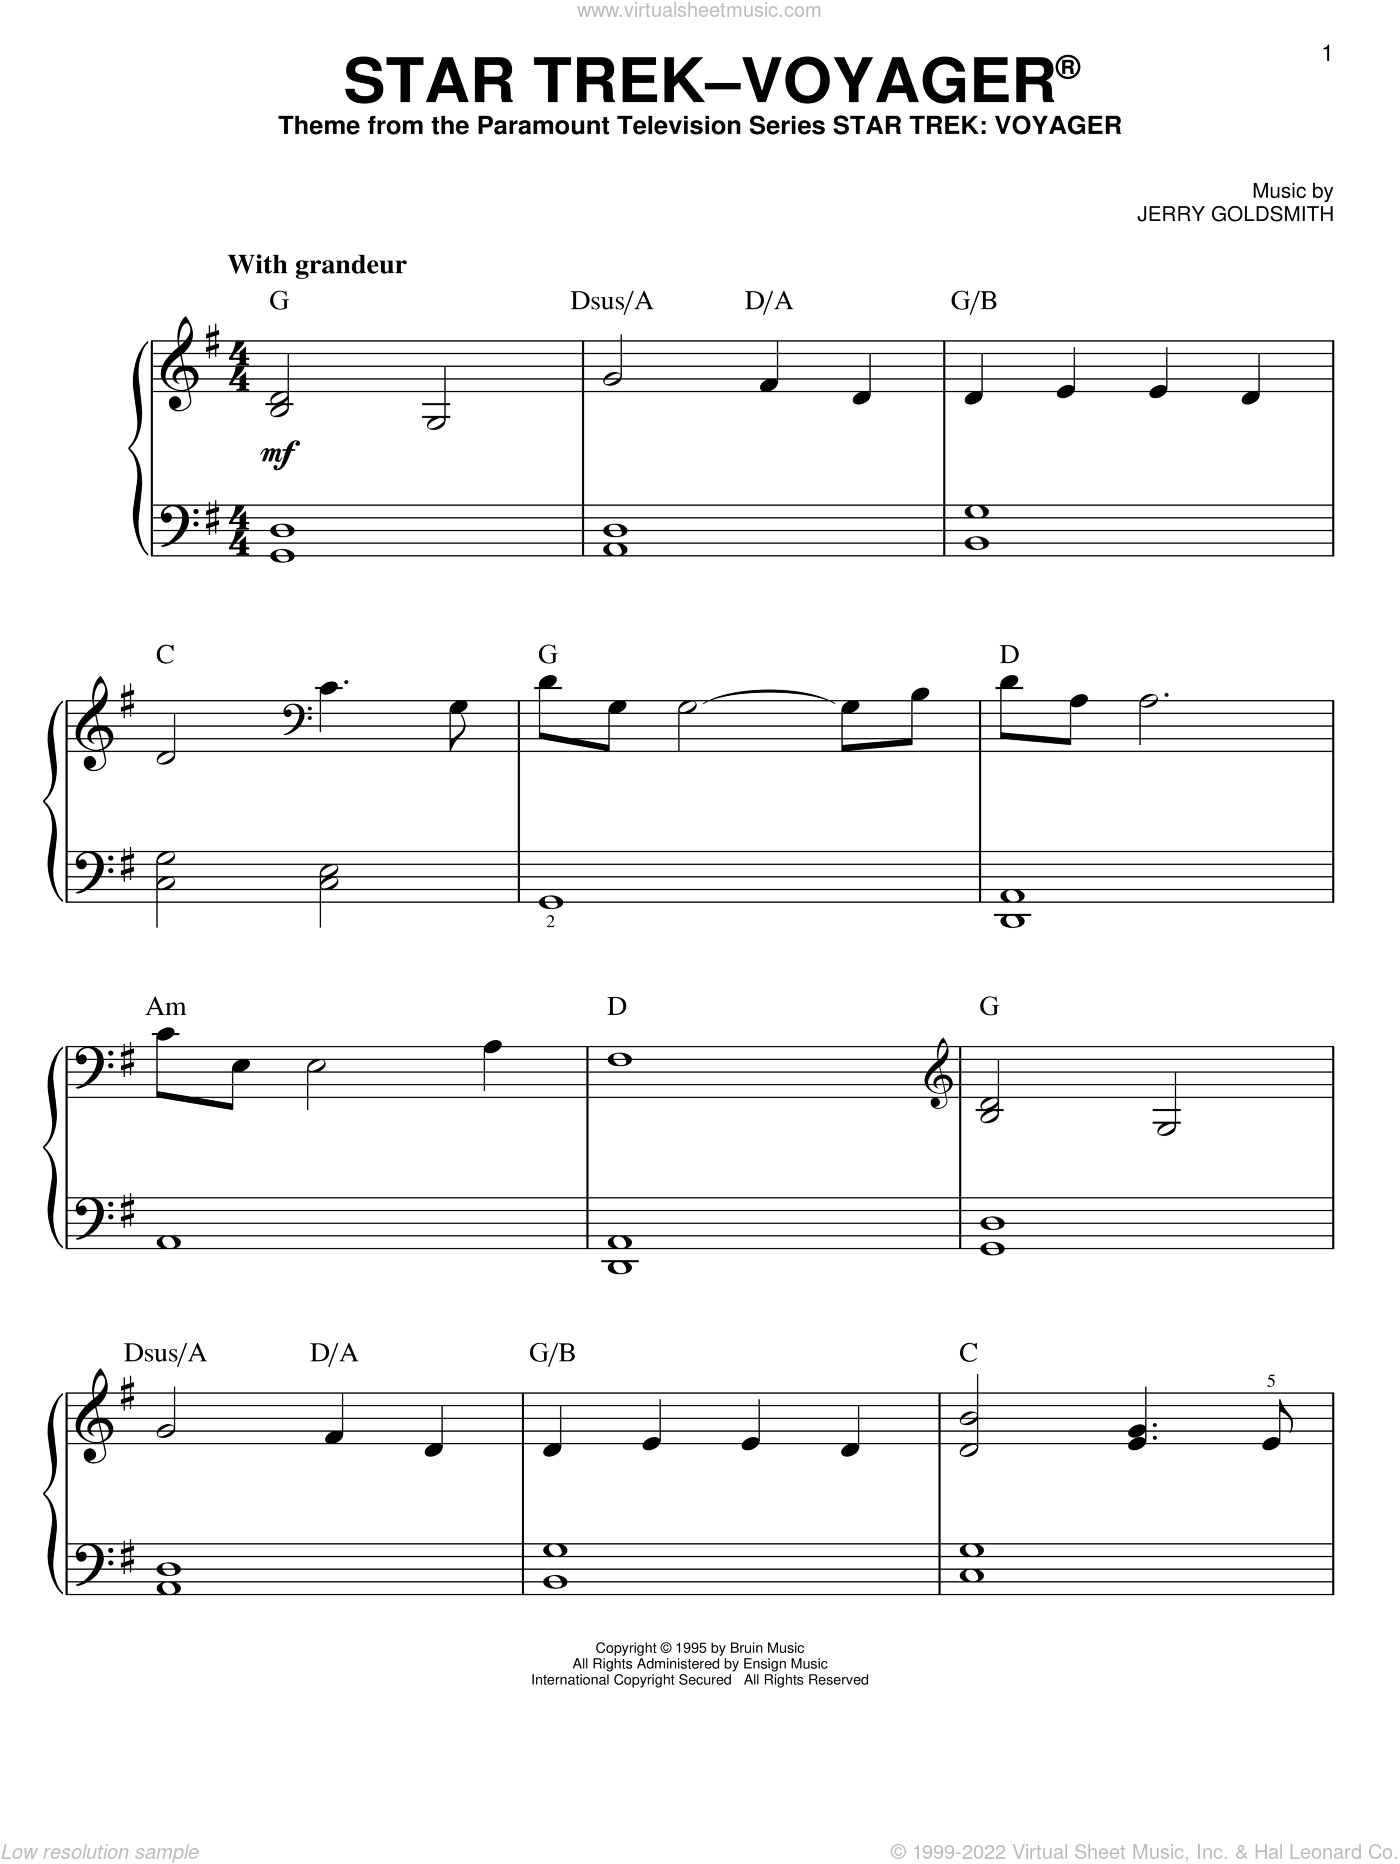 Goldsmith - Star Trek - Voyager(R) sheet music for piano solo